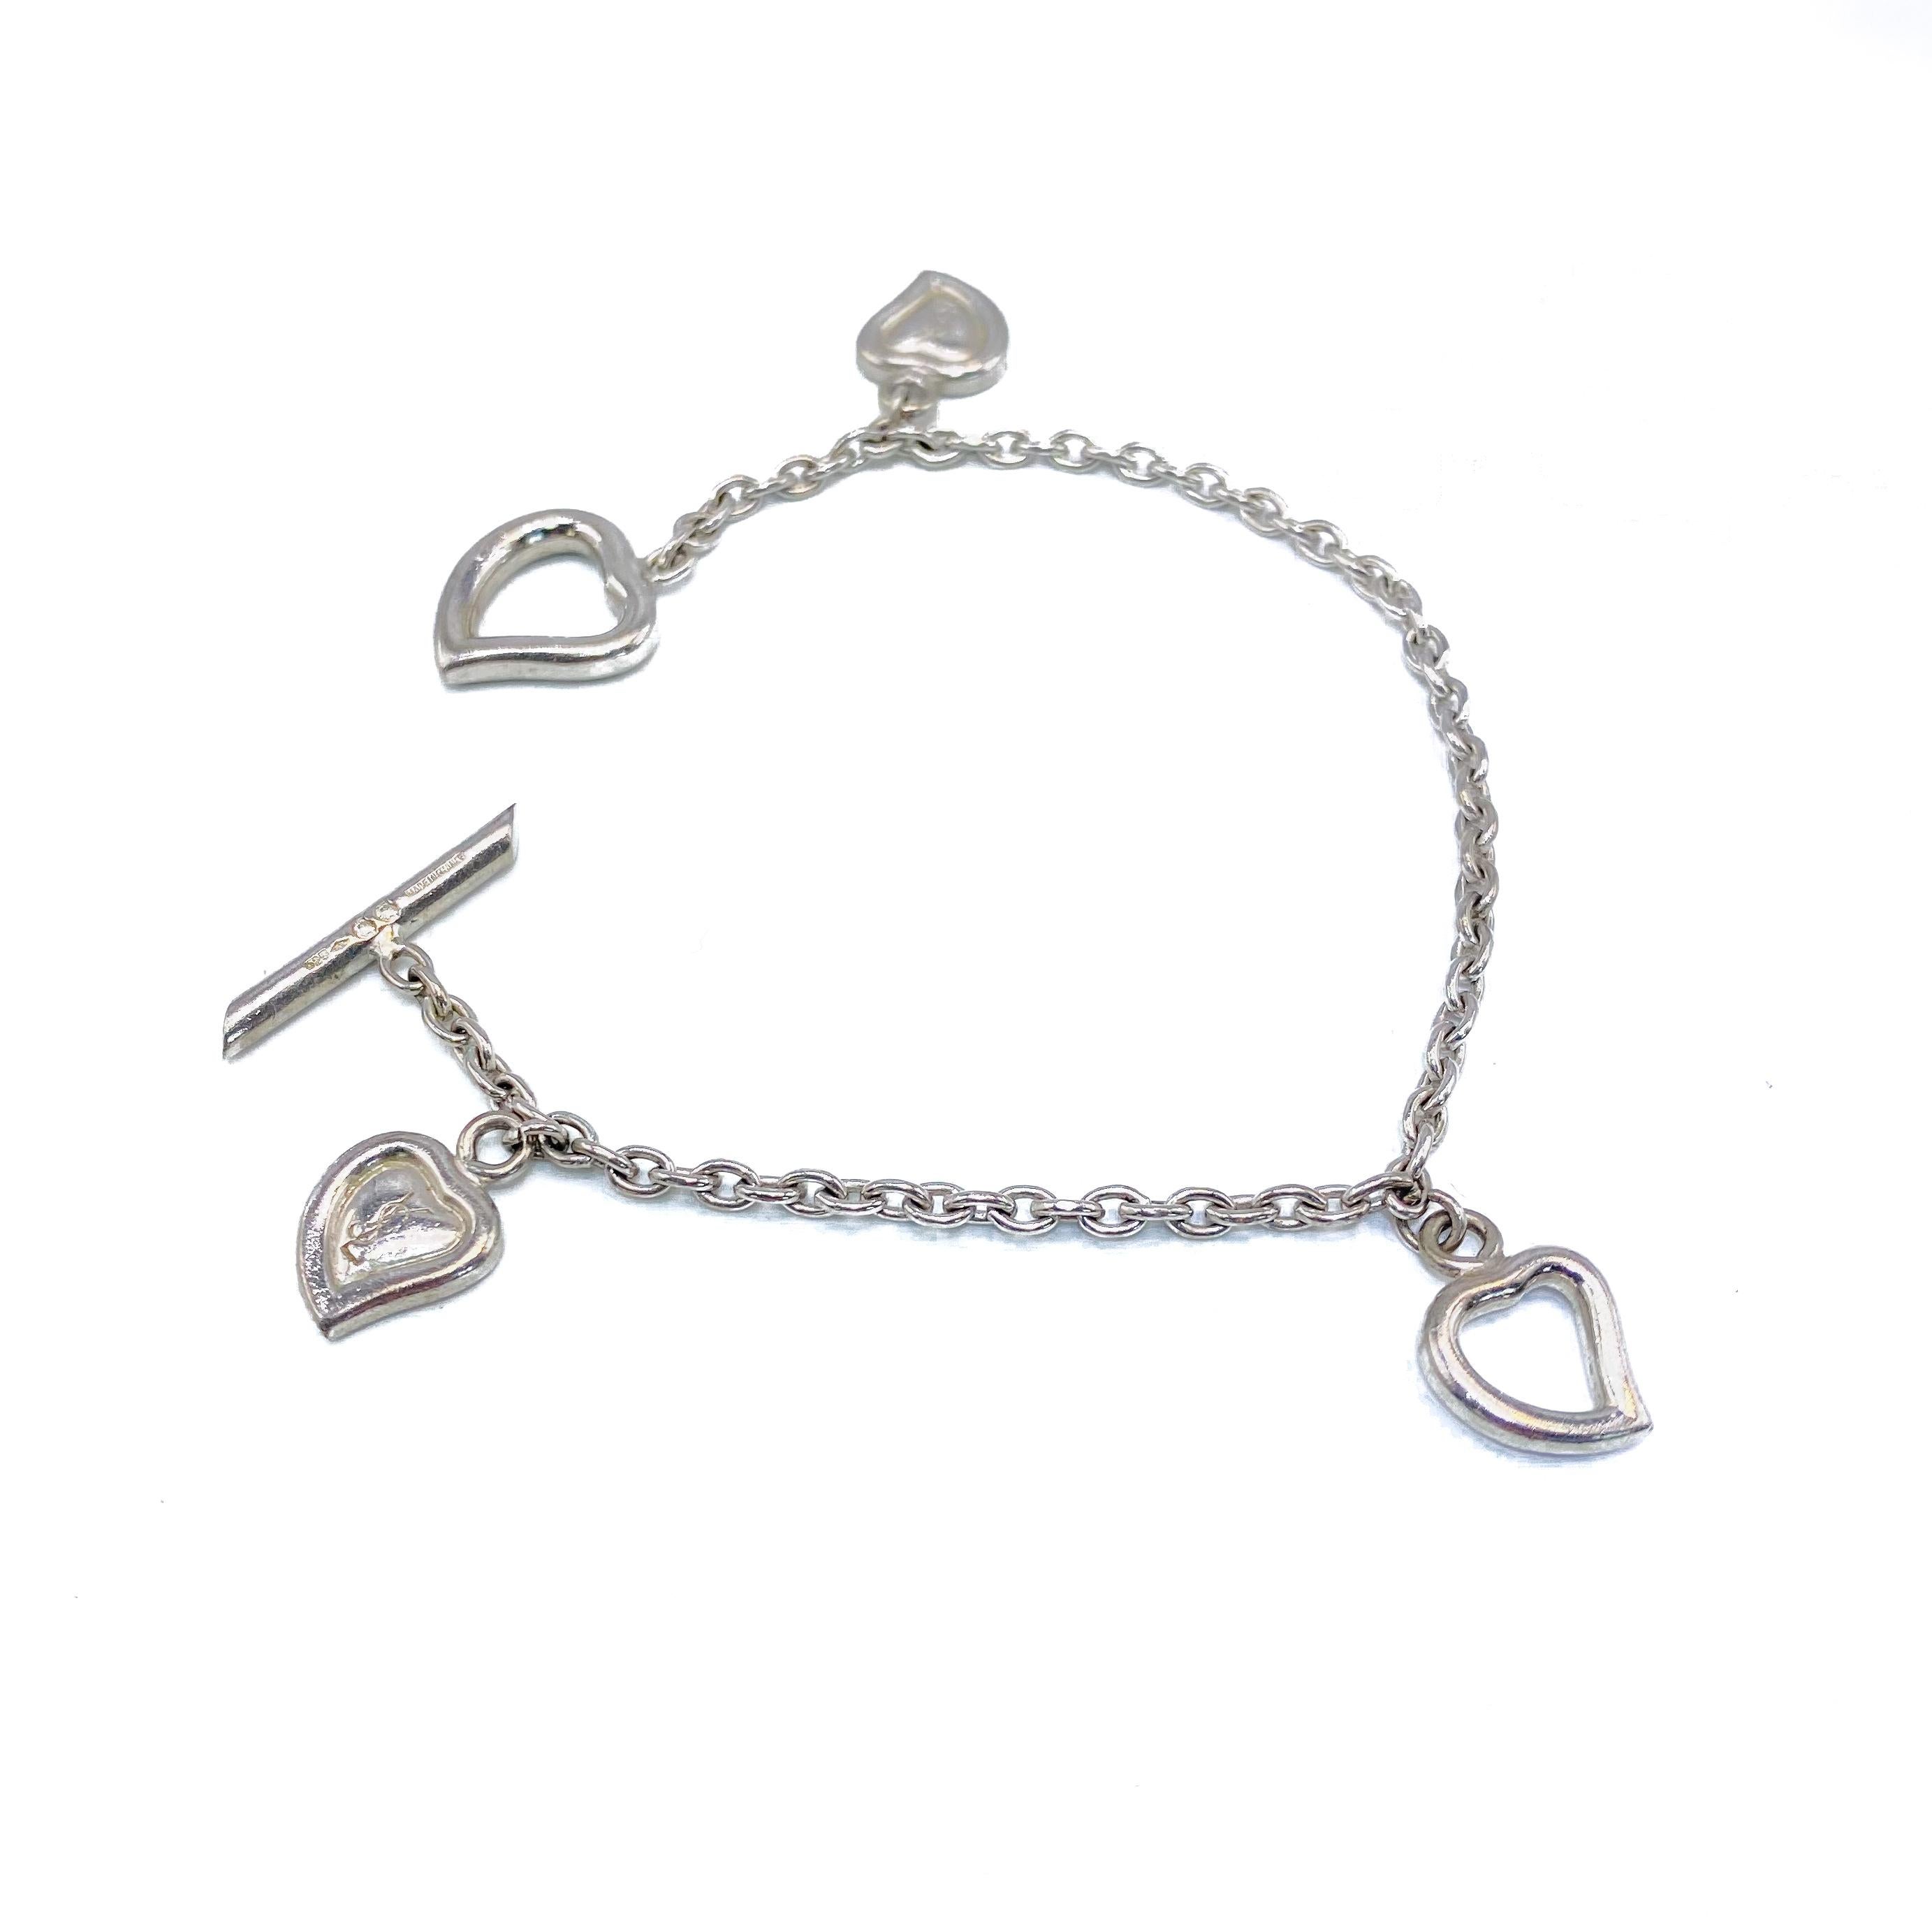 Yves Saint Laurent Vintage 1990s Silver Chain Bracelet

Beautifully delicate sterling silver piece from the House of Yves Saint Laurent Argent Collection

Detail
-Made in France in the 1990s
-Delicate sterling silver chain featuring four YSL shaped